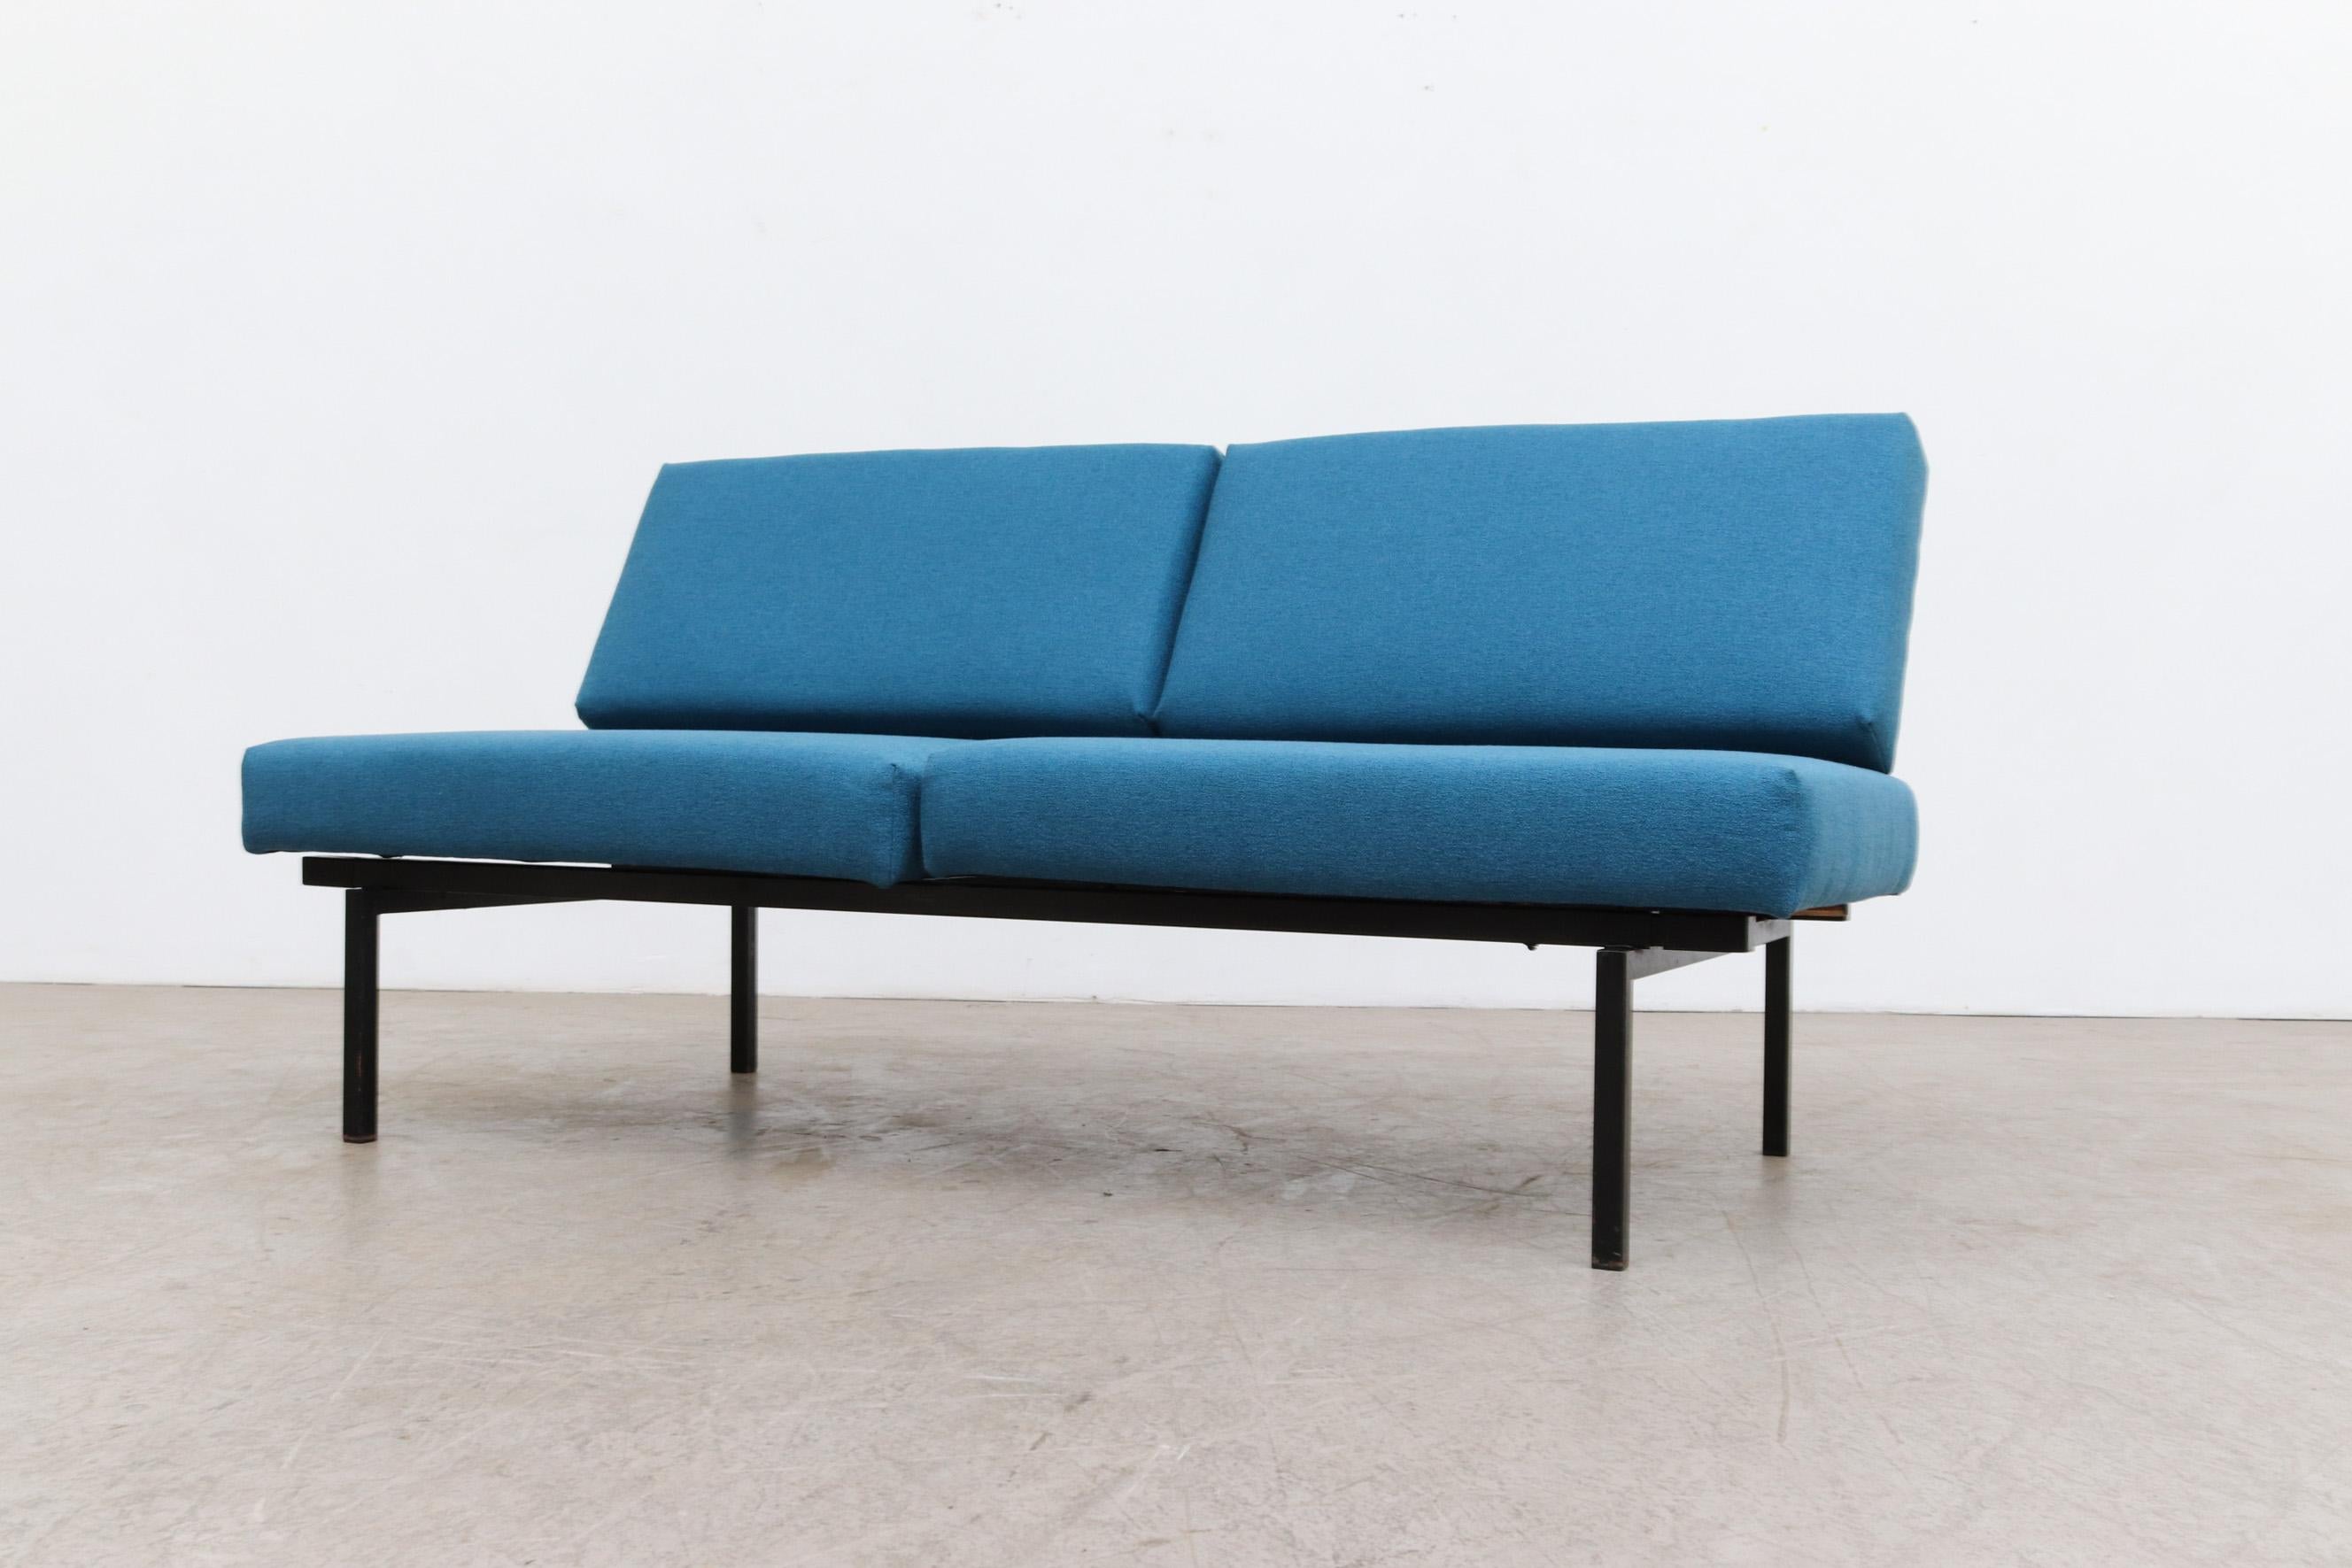 Coen de Vries for Pilastro Convertible Loveseat with Blue Cushions 3